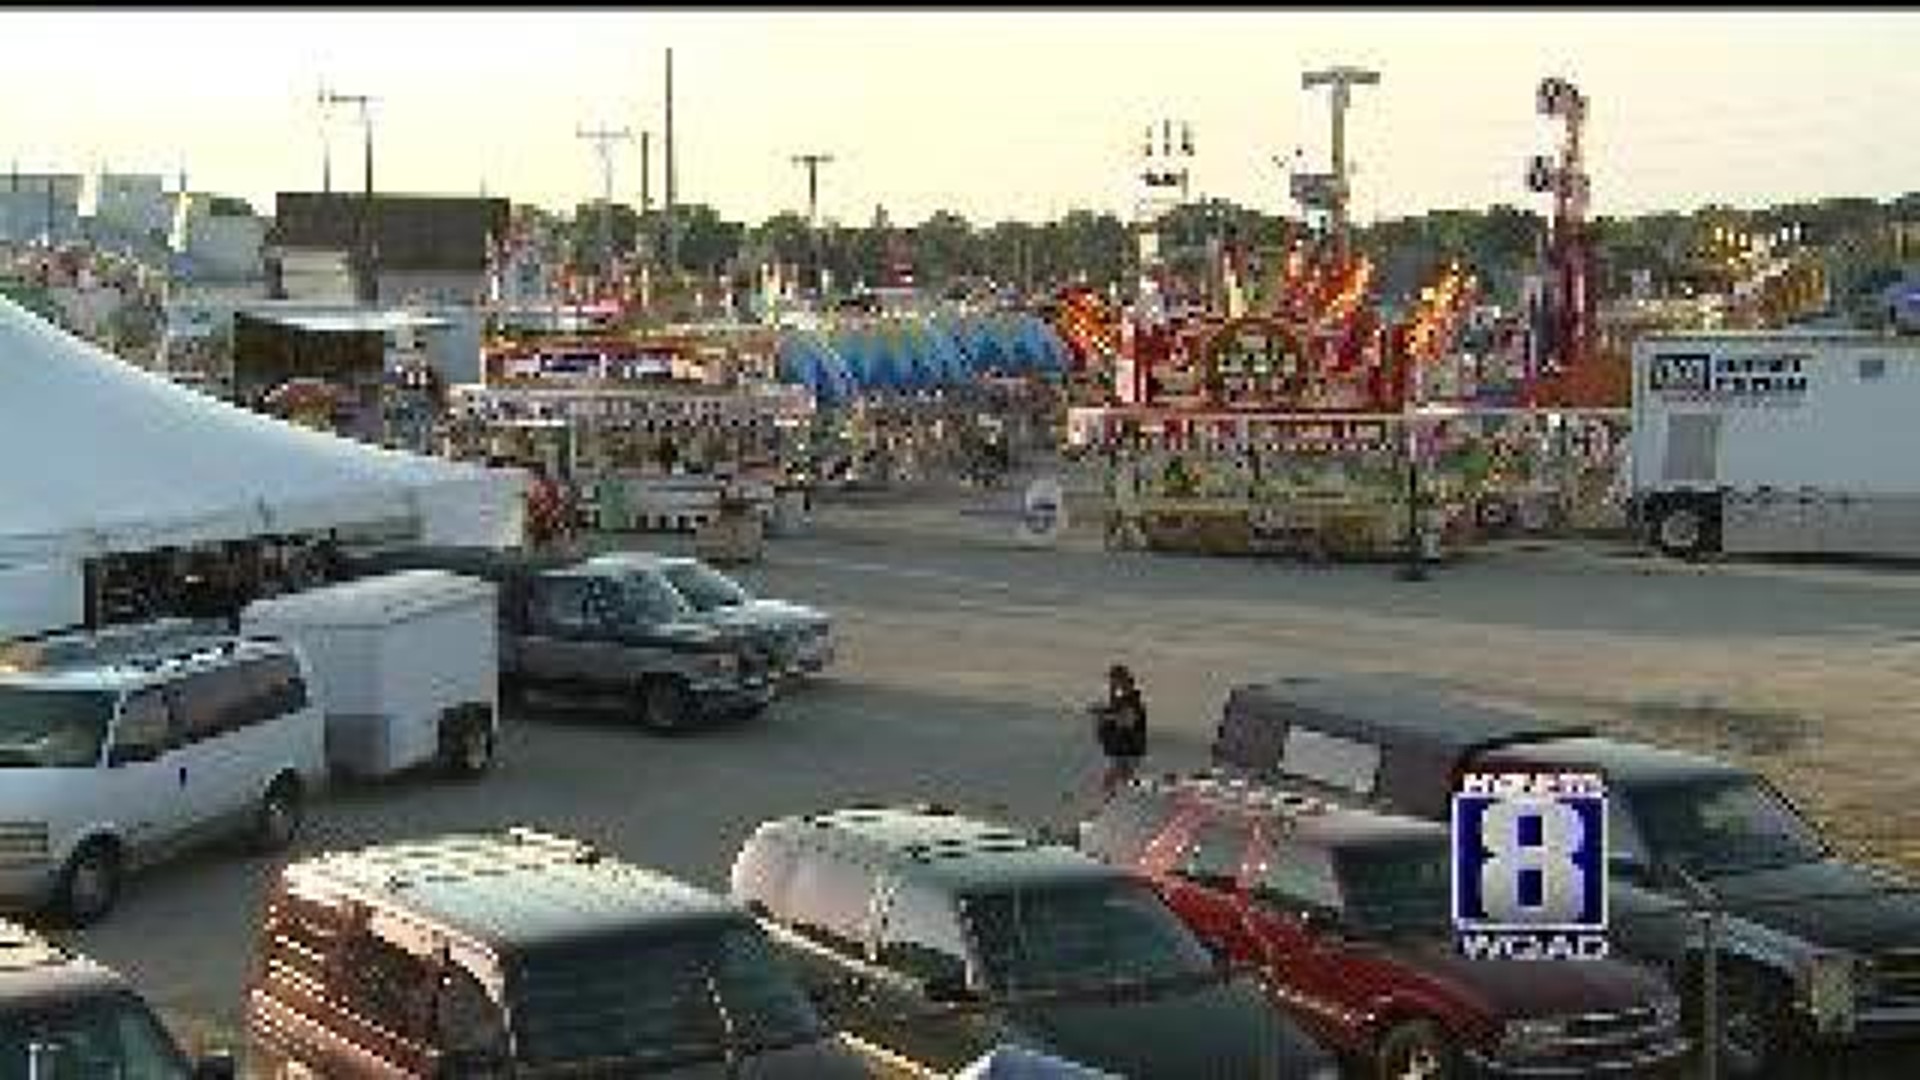 Rock Island County Fair is rocking and rolling